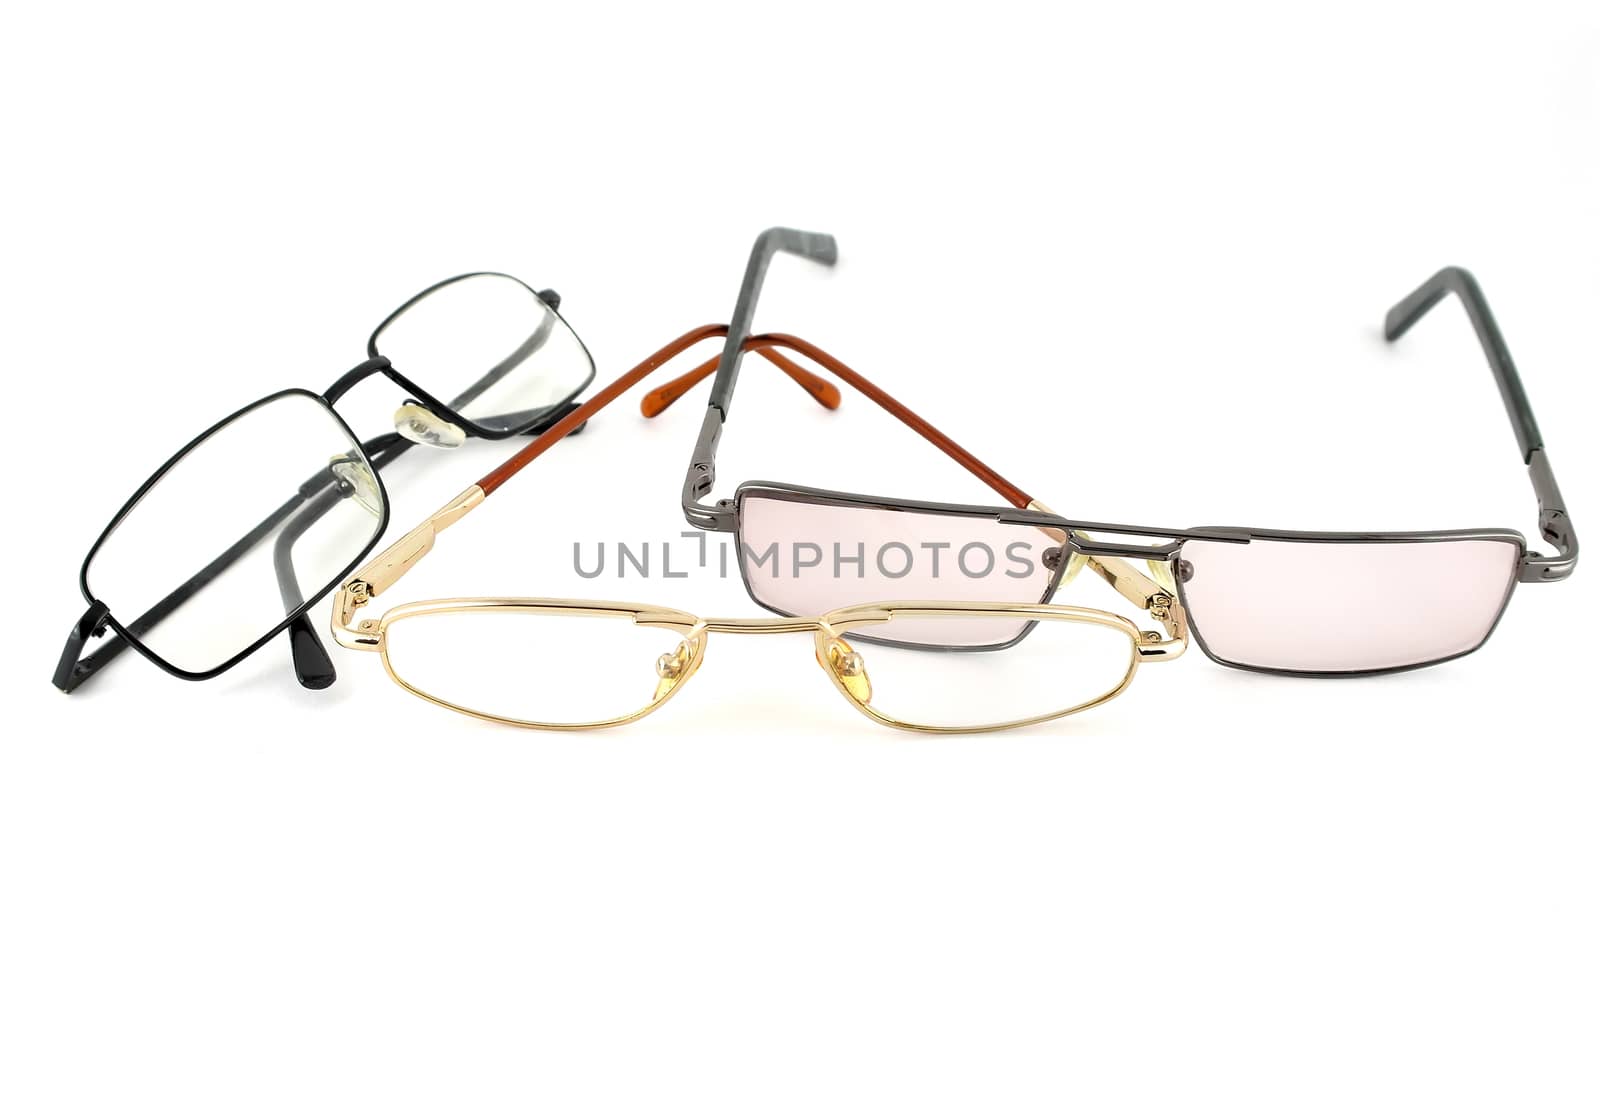 Three optical glasses over white by sergpet